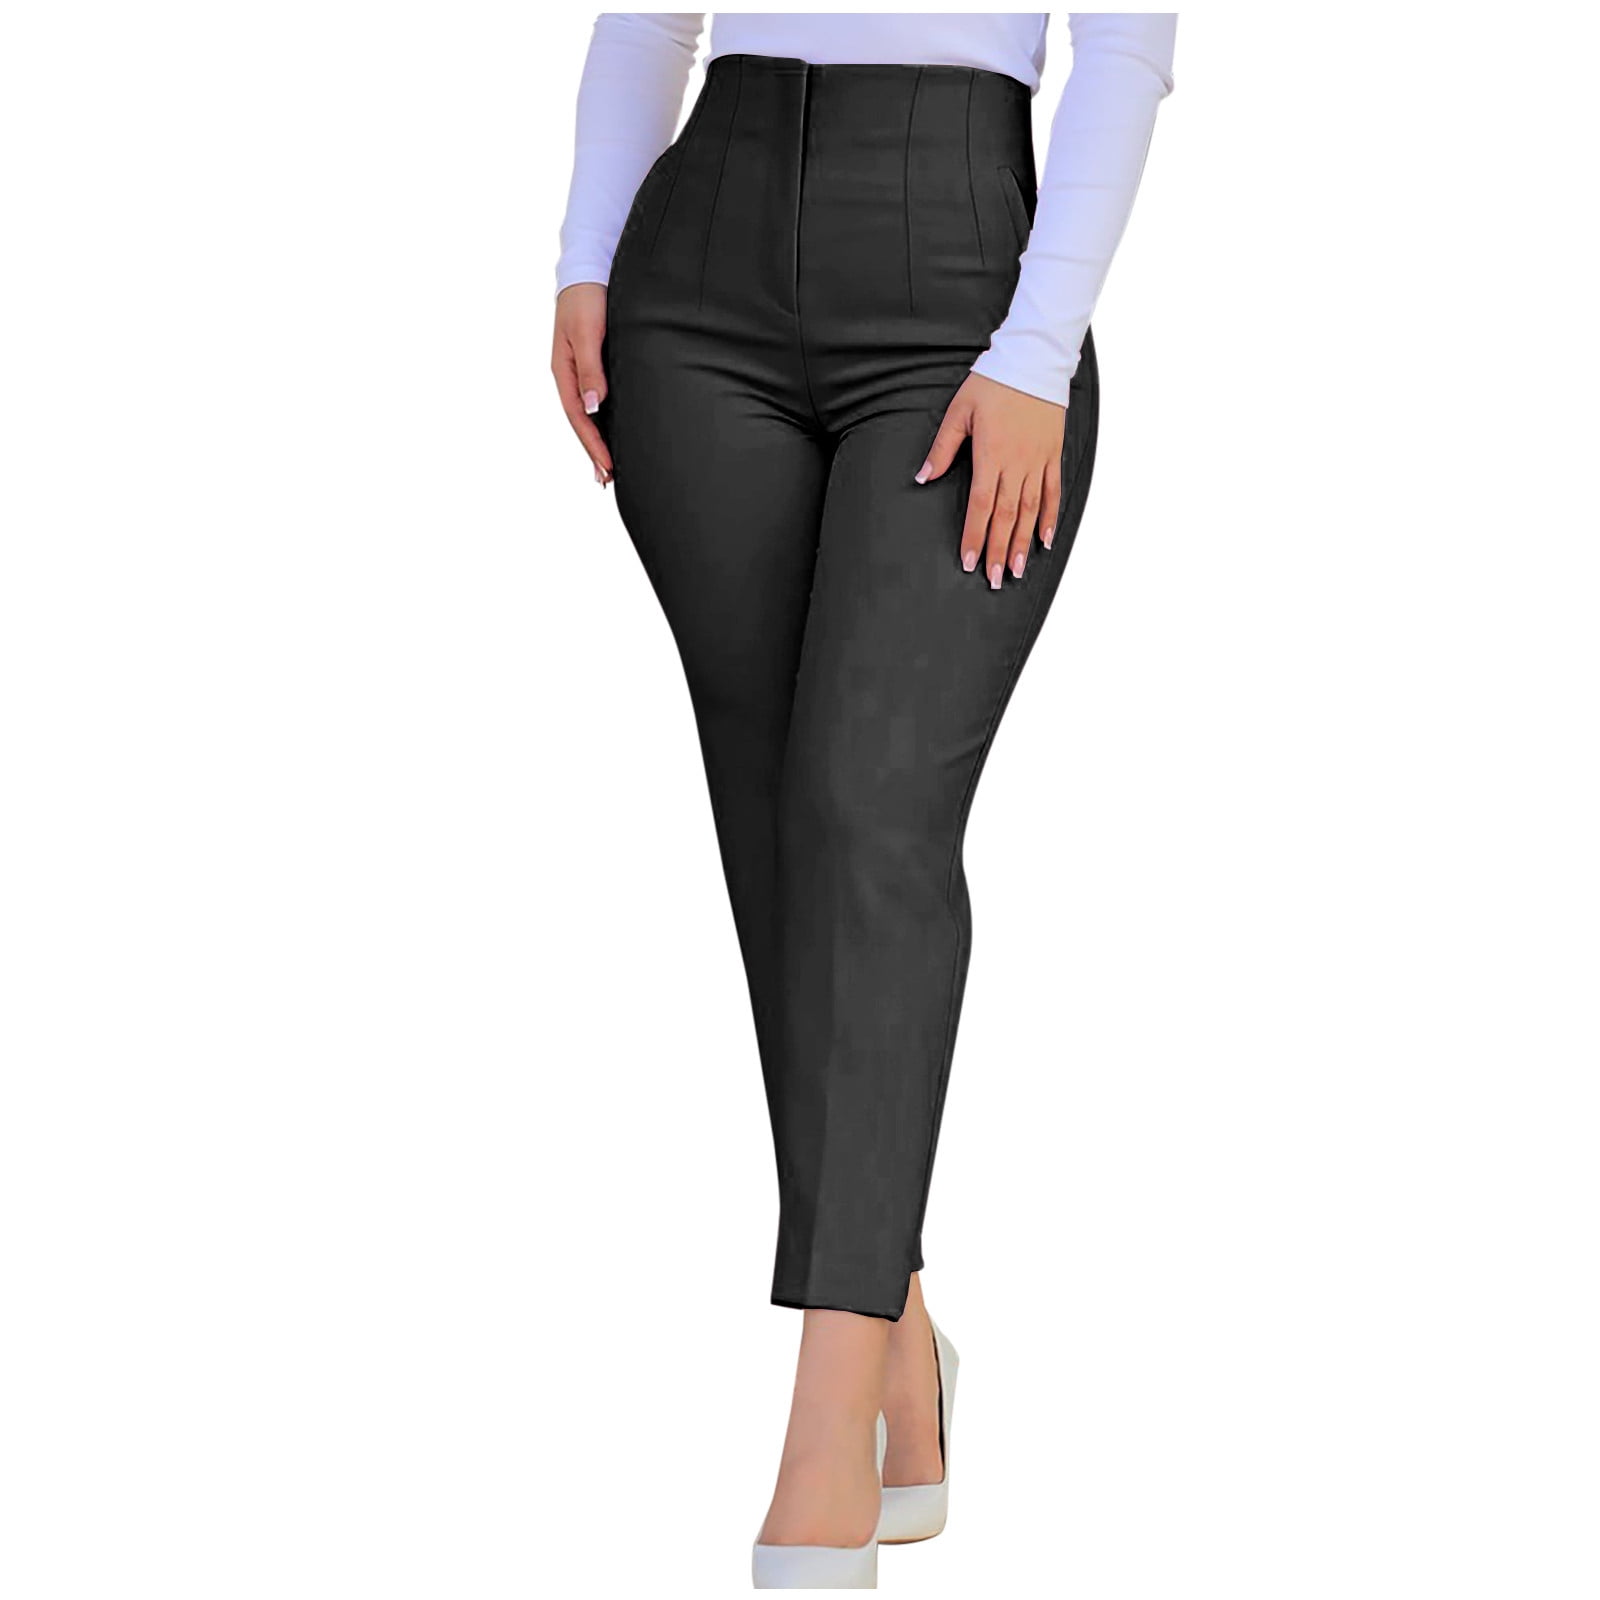 RYRJJ Women s Cropped Dress Pants with Pockets Business Office Casual Pleated High Waist Slim Fit Pencil Pants for Work Trousers Black M 6bcf6f7b f7fd 424b 8e0a e2dada80e8bf.7aa18429868810fde2c78f27f628738a